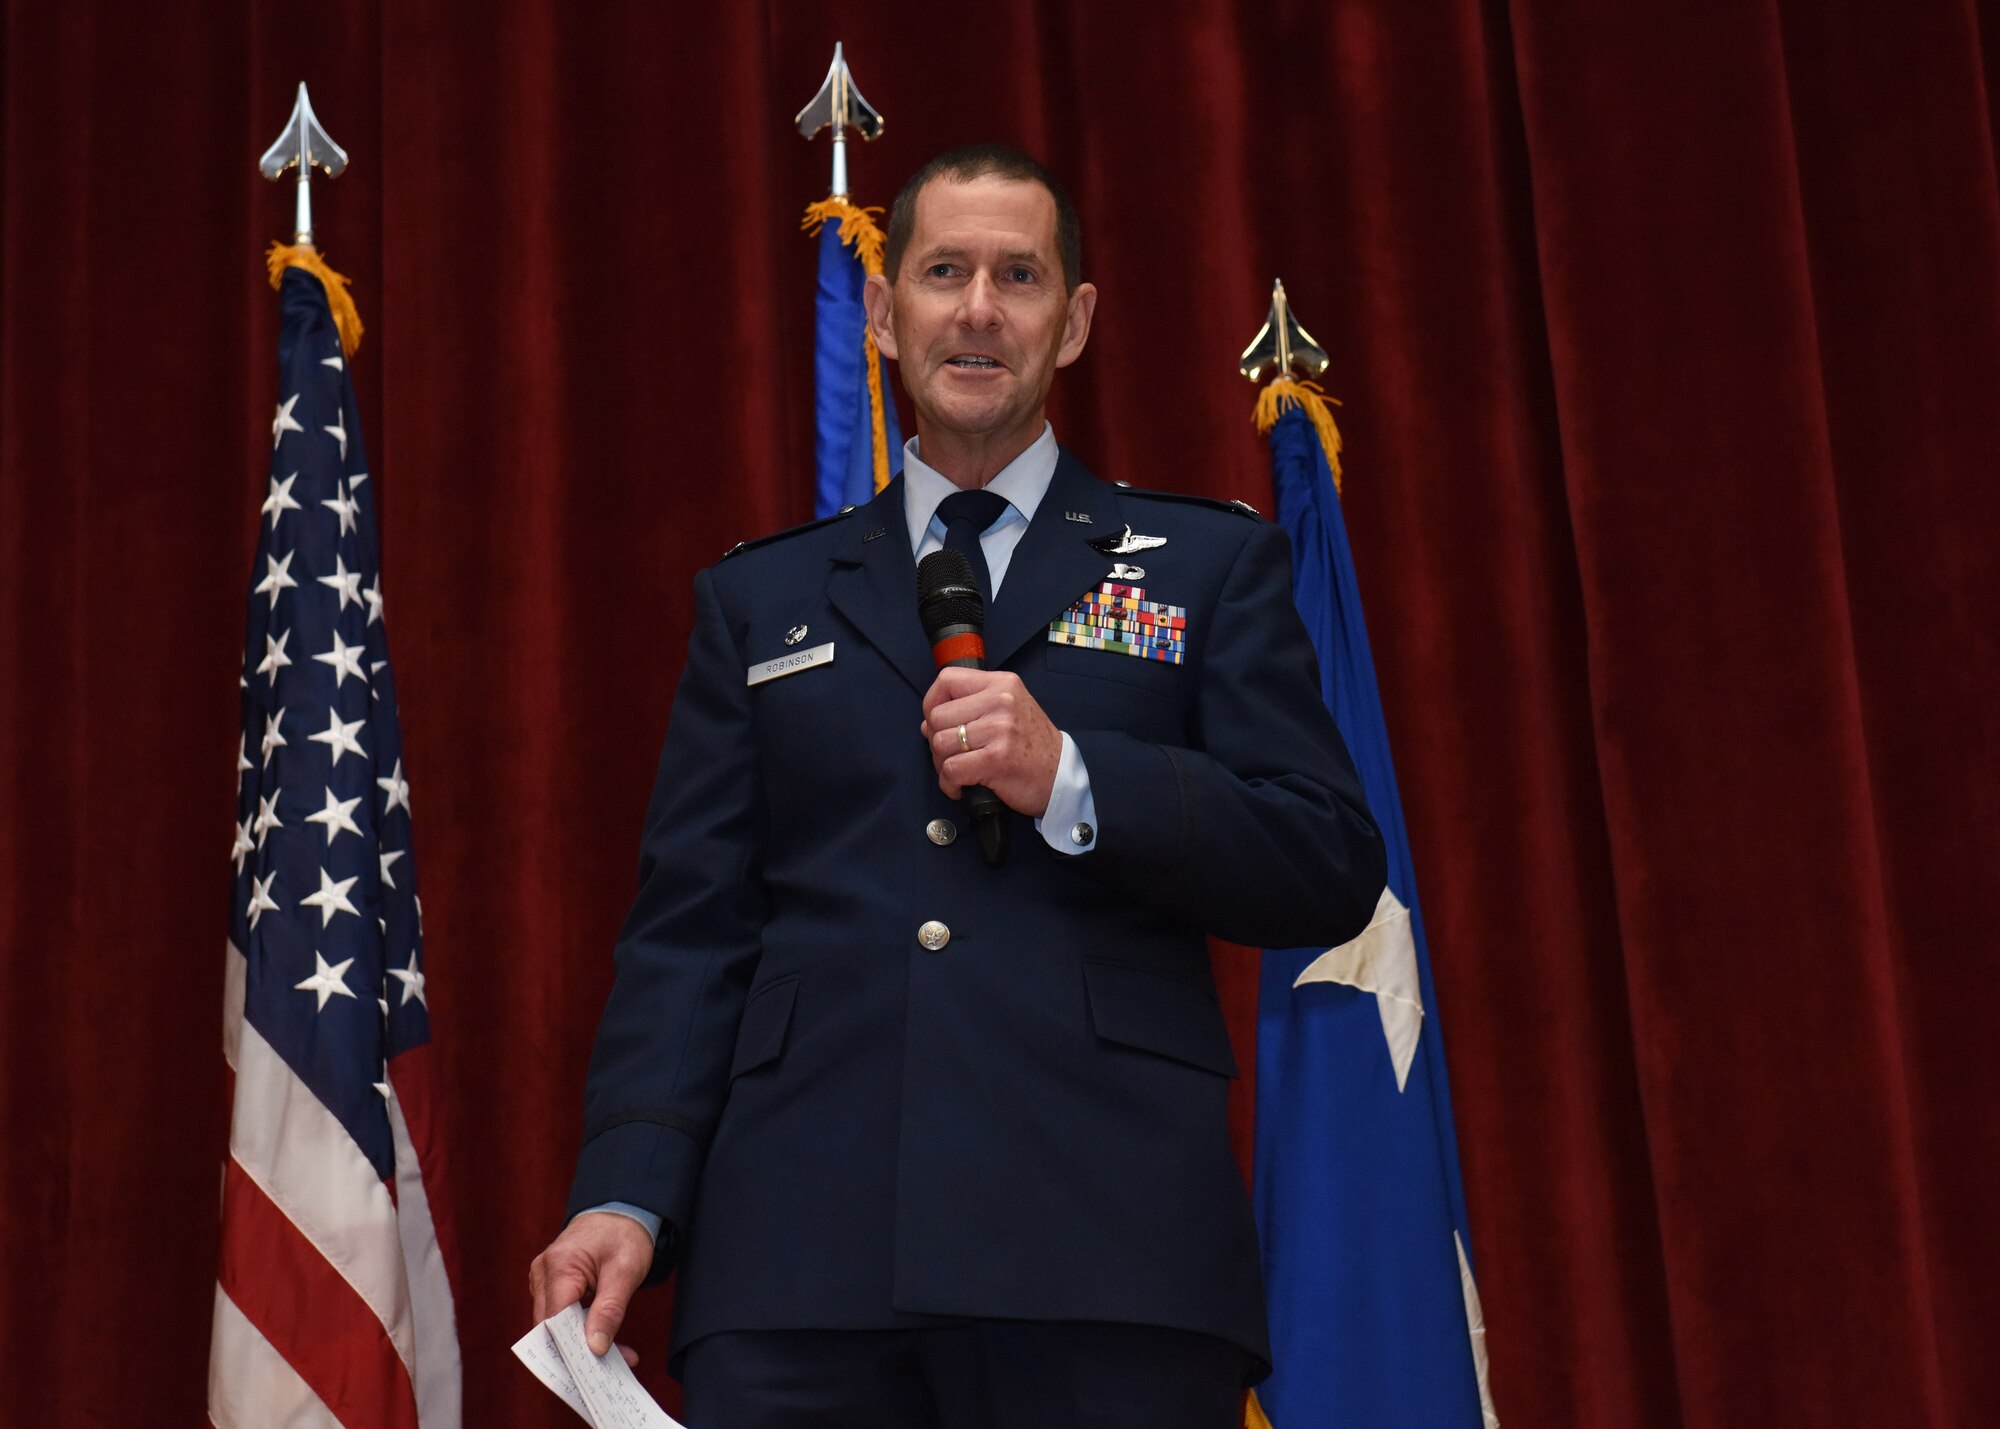 Col. John F. Robinson, 911th Airlift Wing commander, addresses Airmen and guests during his assumption of command ceremony at Moon Area Middle School in Coraopolis, Pennsylvania, Nov. 2, 2019.